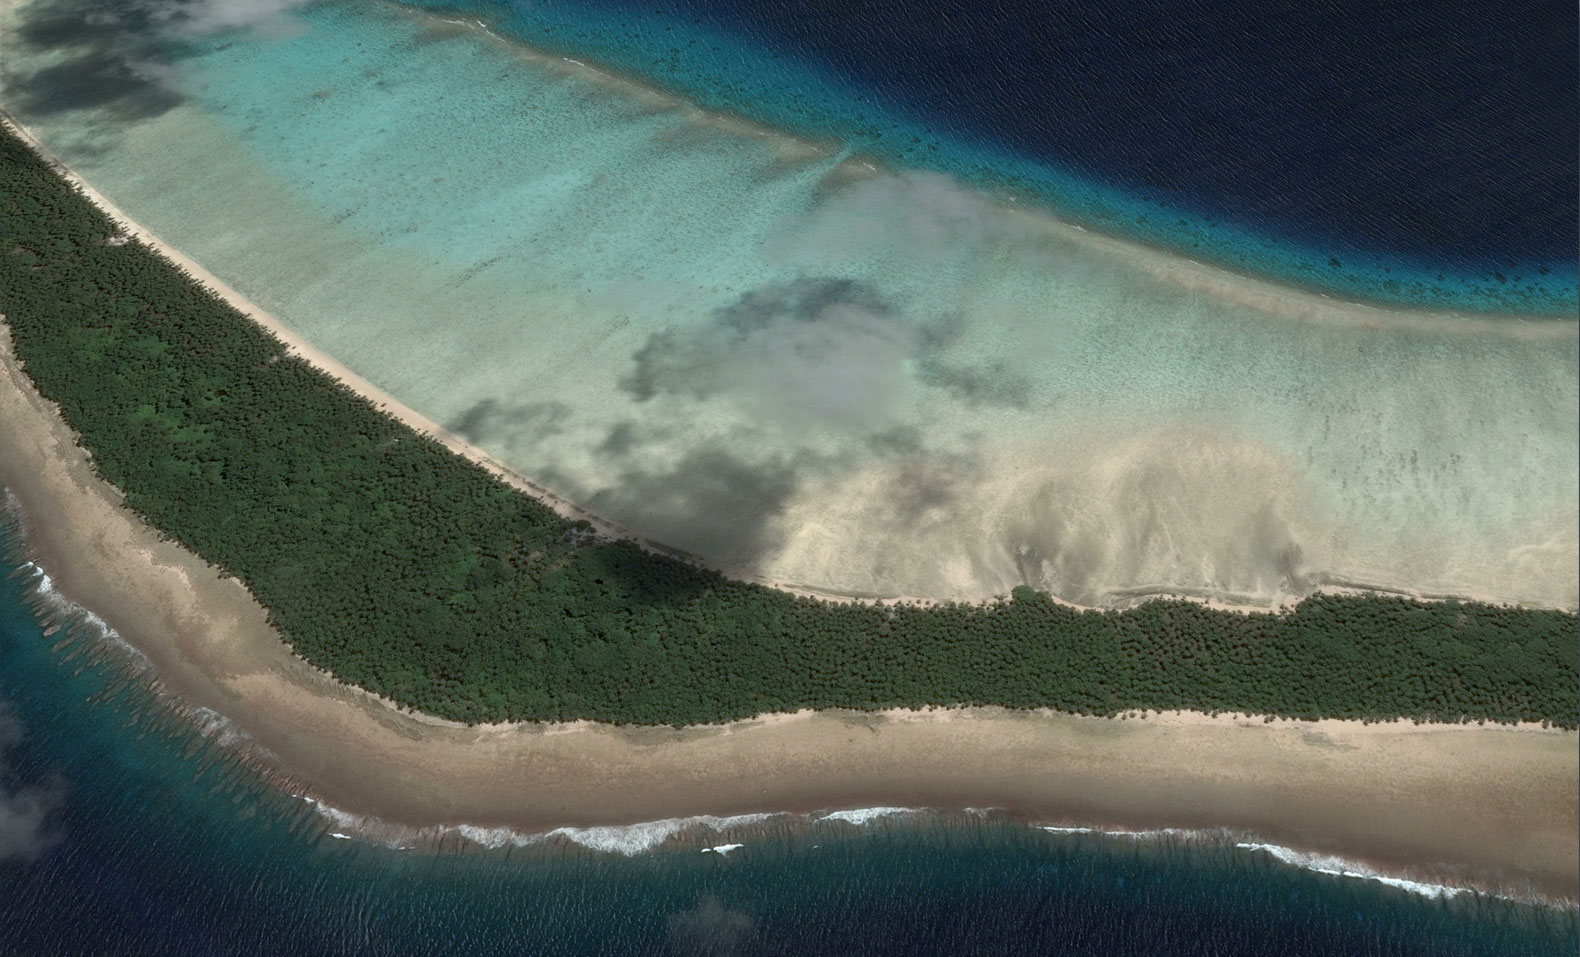 Satellite photograph of an island in the Marshall Islands group, showing very shallow land at the edge of the sea